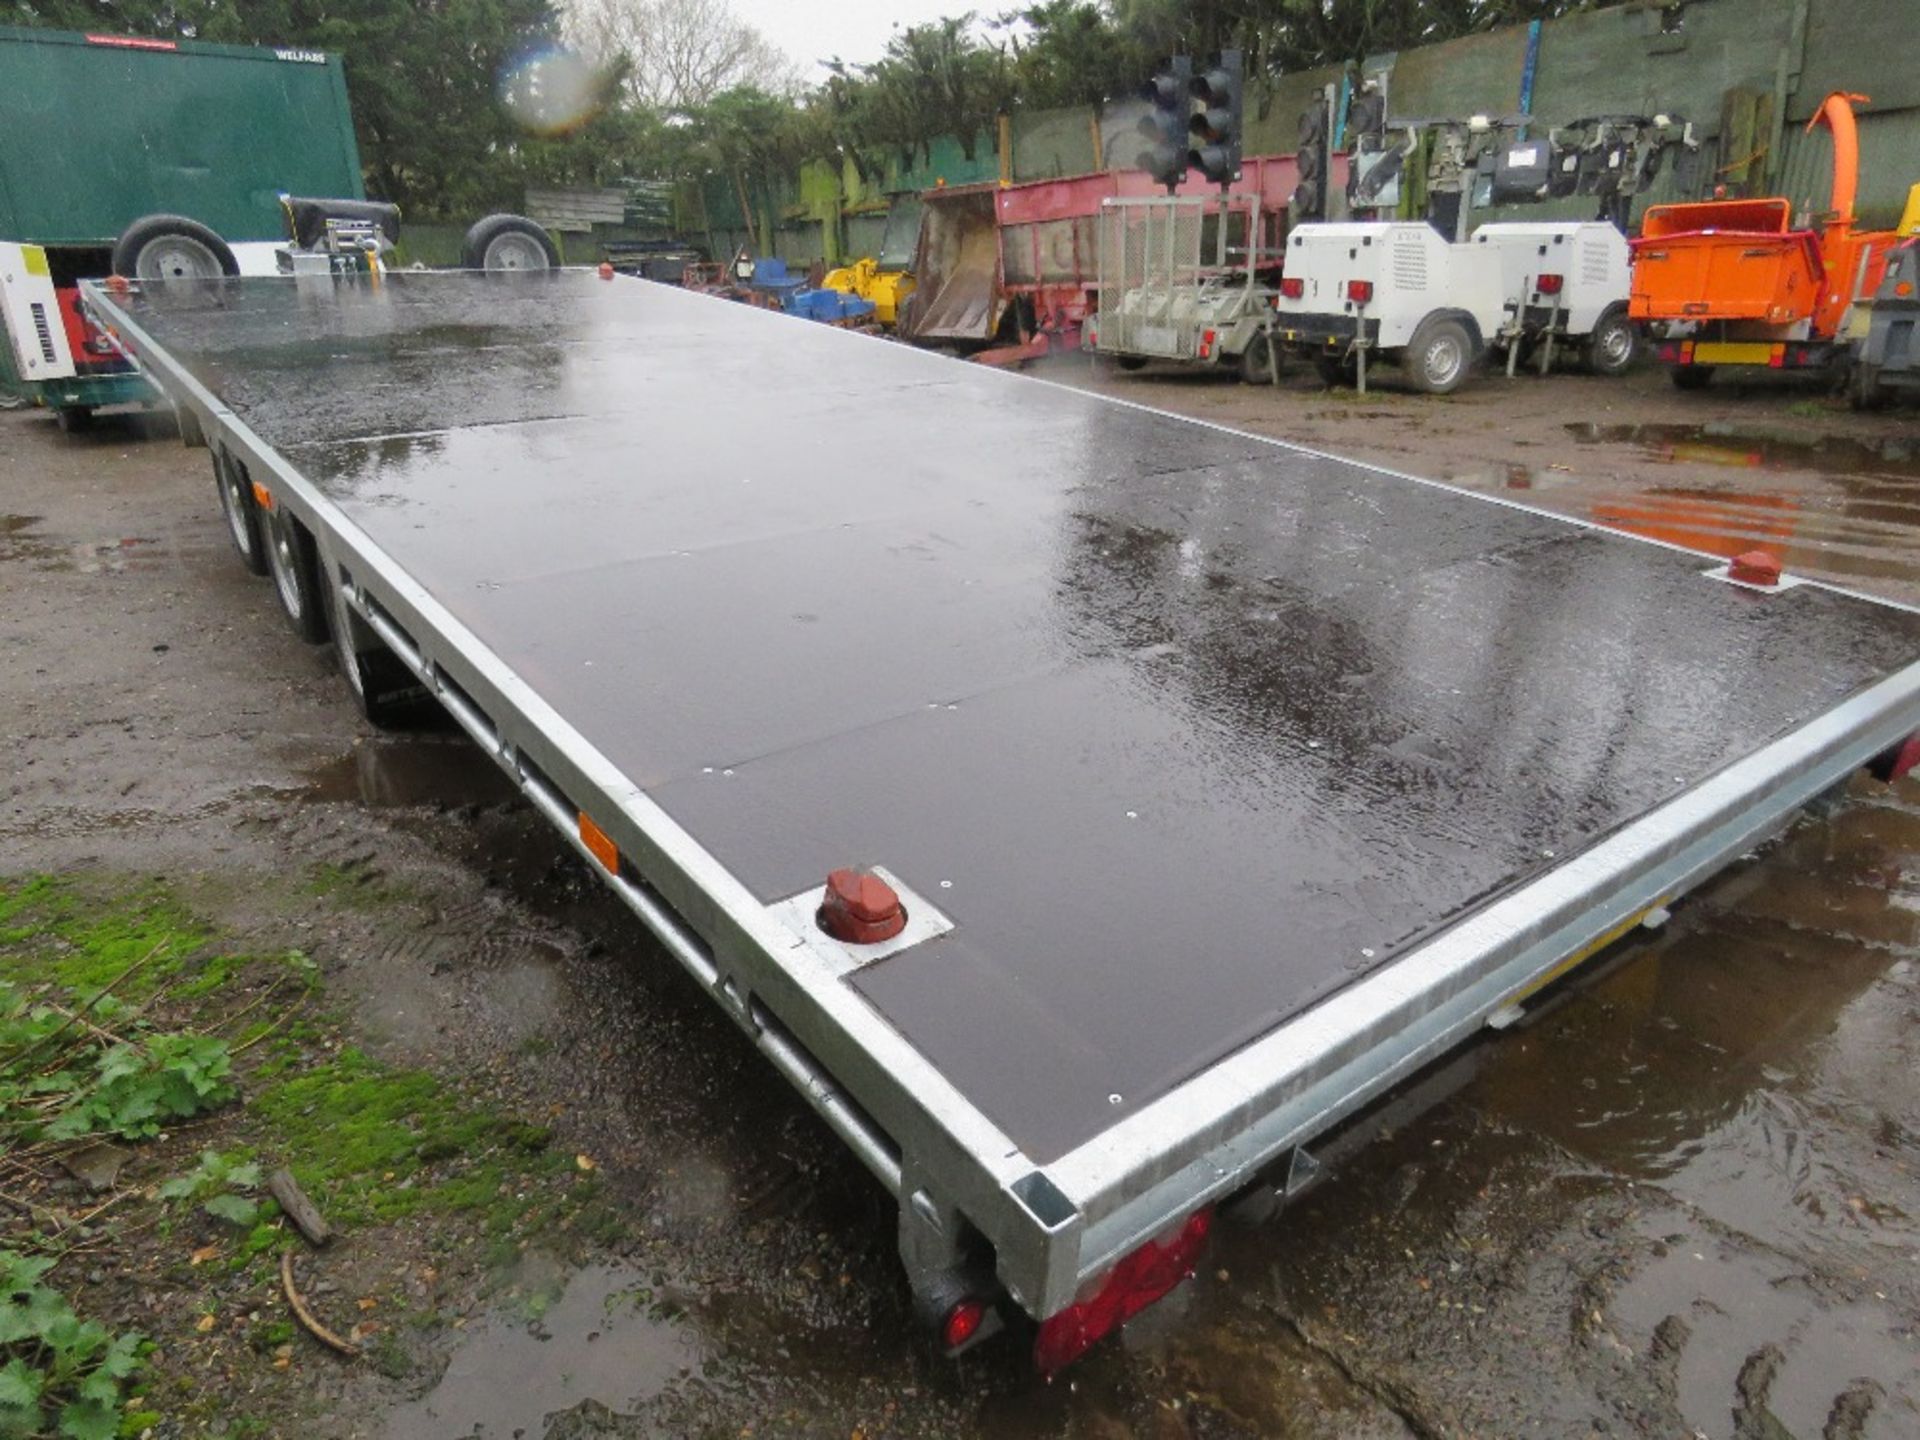 BATESON TILT BED TRIAXLE 3500KG FLAT TRAILER WITH WINCH 22FT LENGTH X 8FT WIDTH. WITH RAMPS UNDERNEA - Image 5 of 11